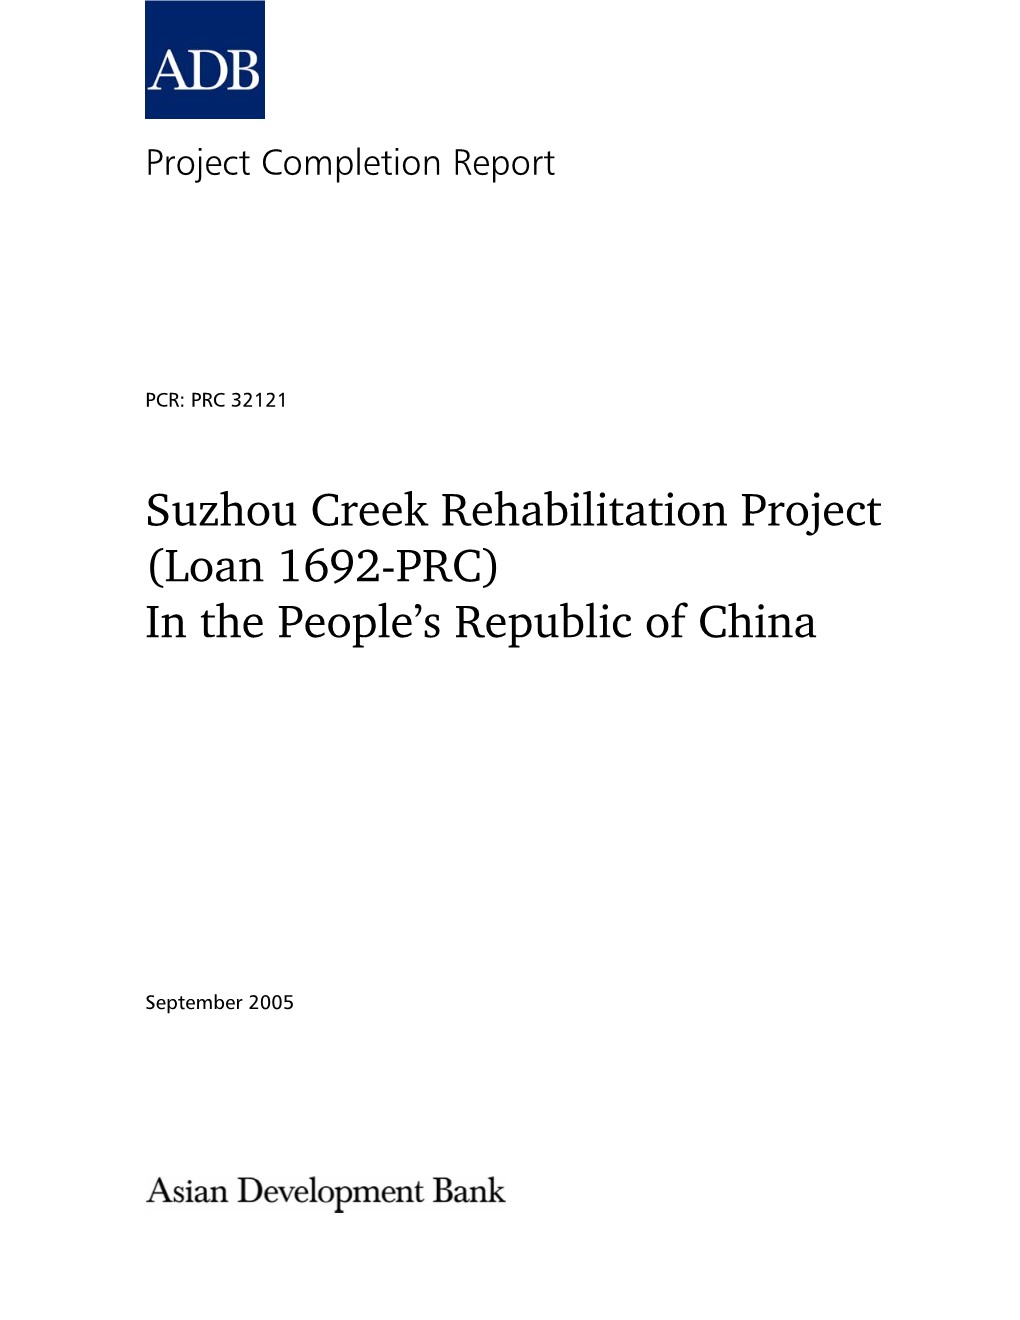 Suzhou Creek Rehabilitation Project (Loan 1692-PRC) in the People’S Republic of China